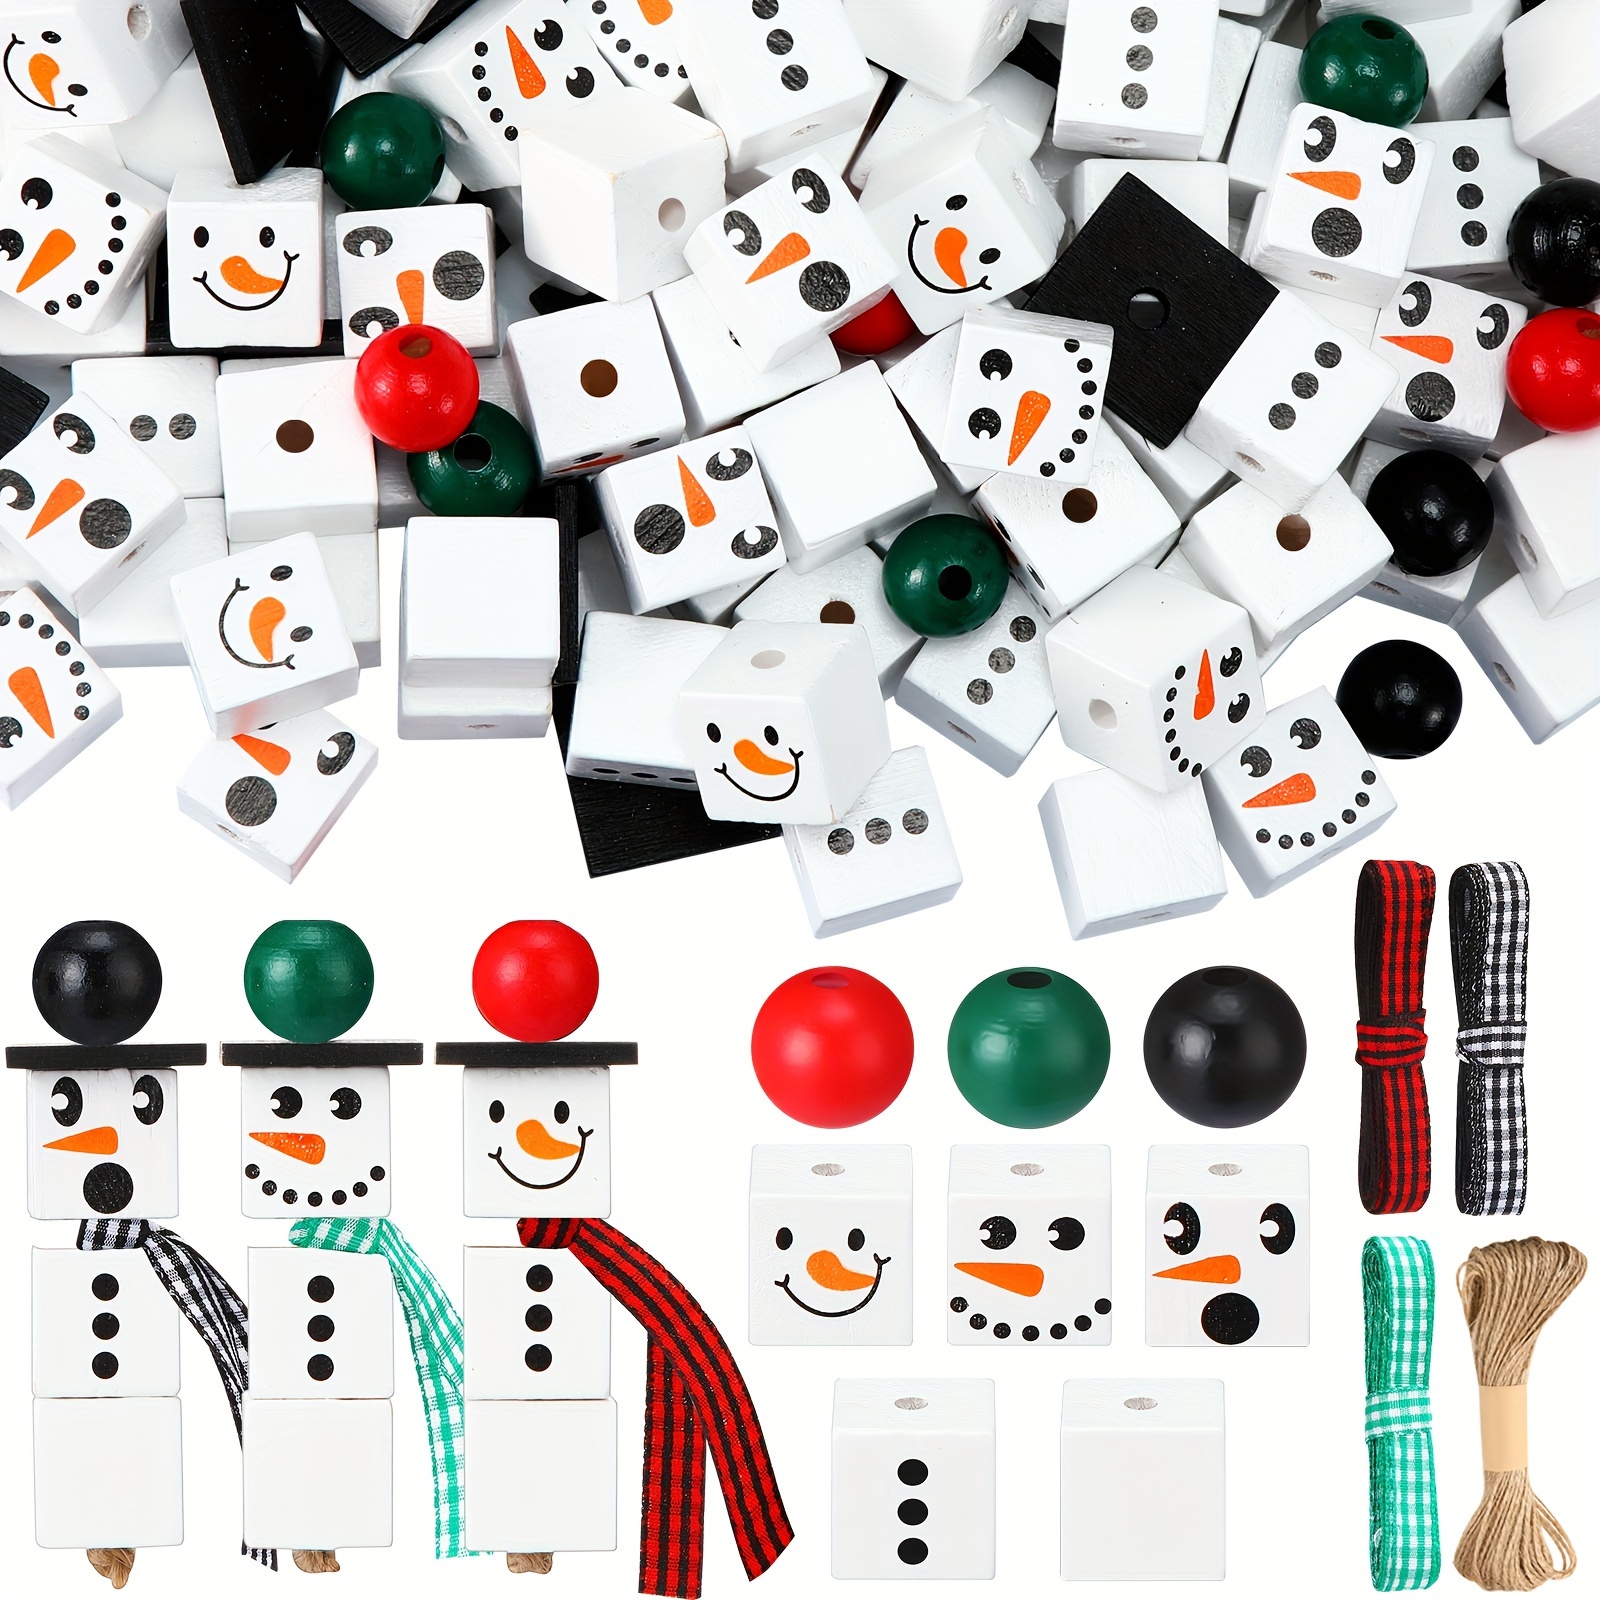 

300 Pcs Christmas Wooden Beads Snowman Beads For Crafts Wood Bead Diy Christmas Ornaments Christmas Snowman Buffalo Plaid Beads With Twine Scarf For Christmas Party Home Decor (red Green Black)